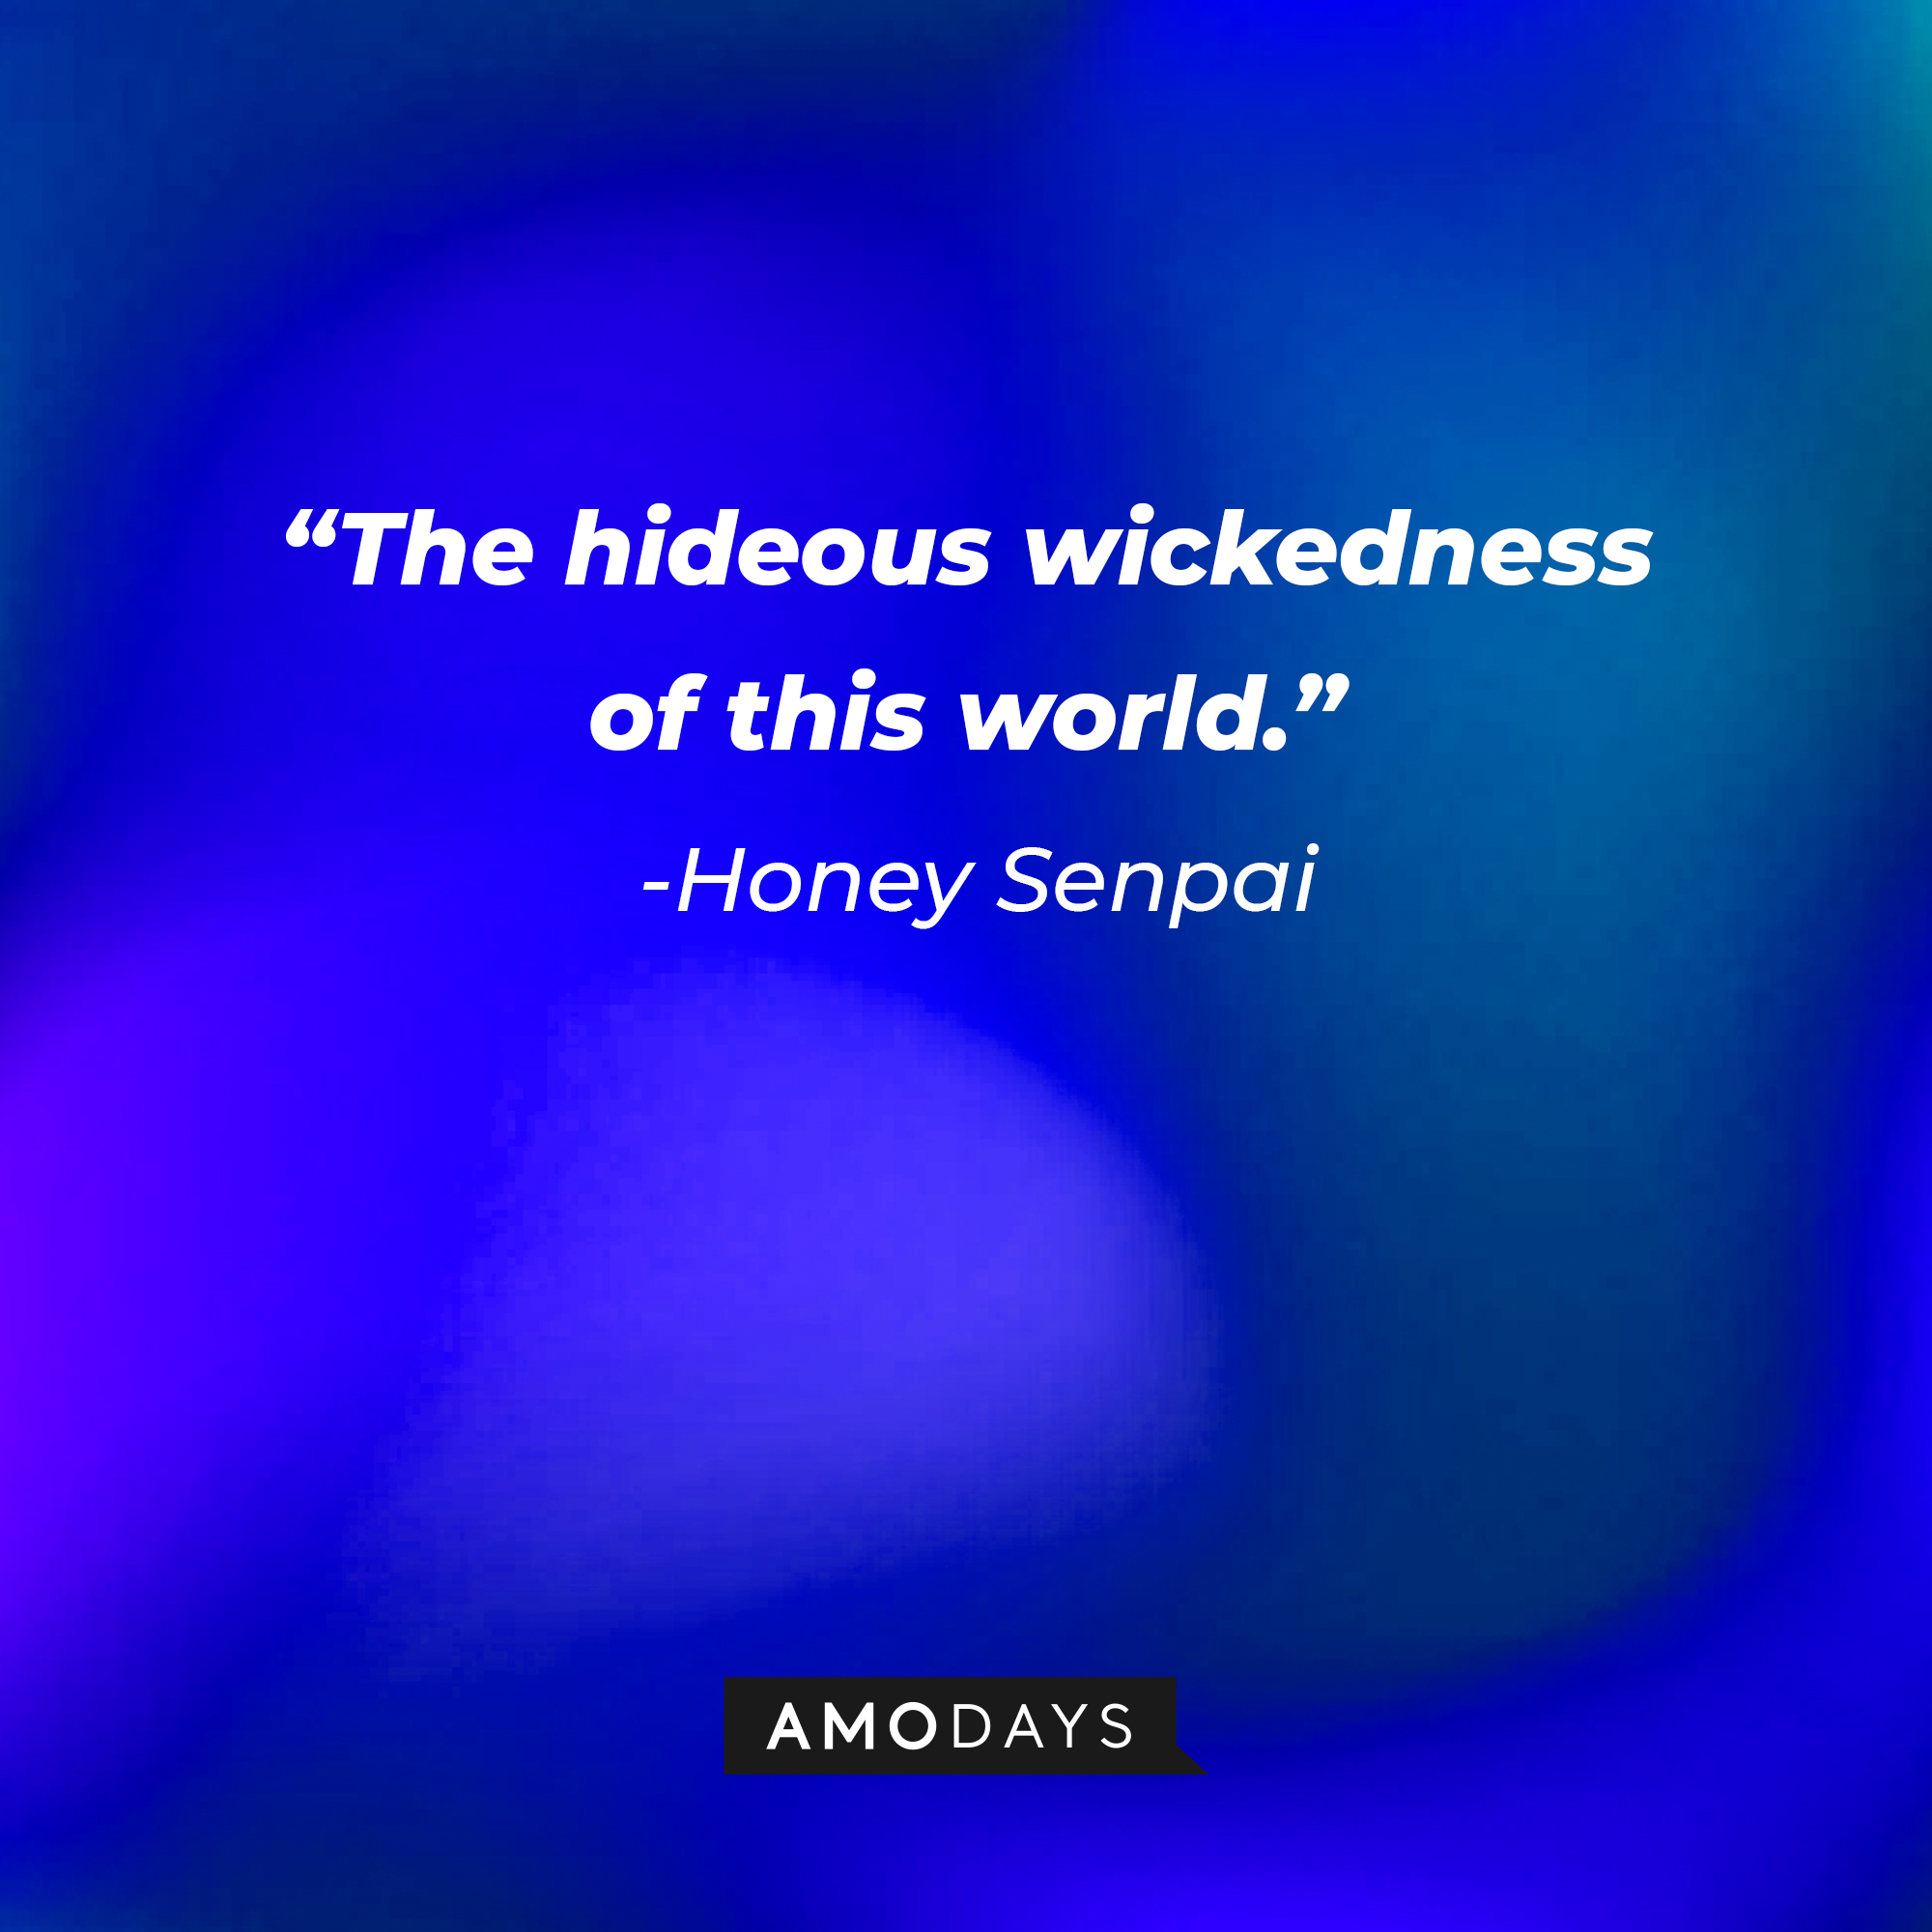 Honey Senpai’s quote: “The hideous wickedness of this world.” | Source: AmoDays